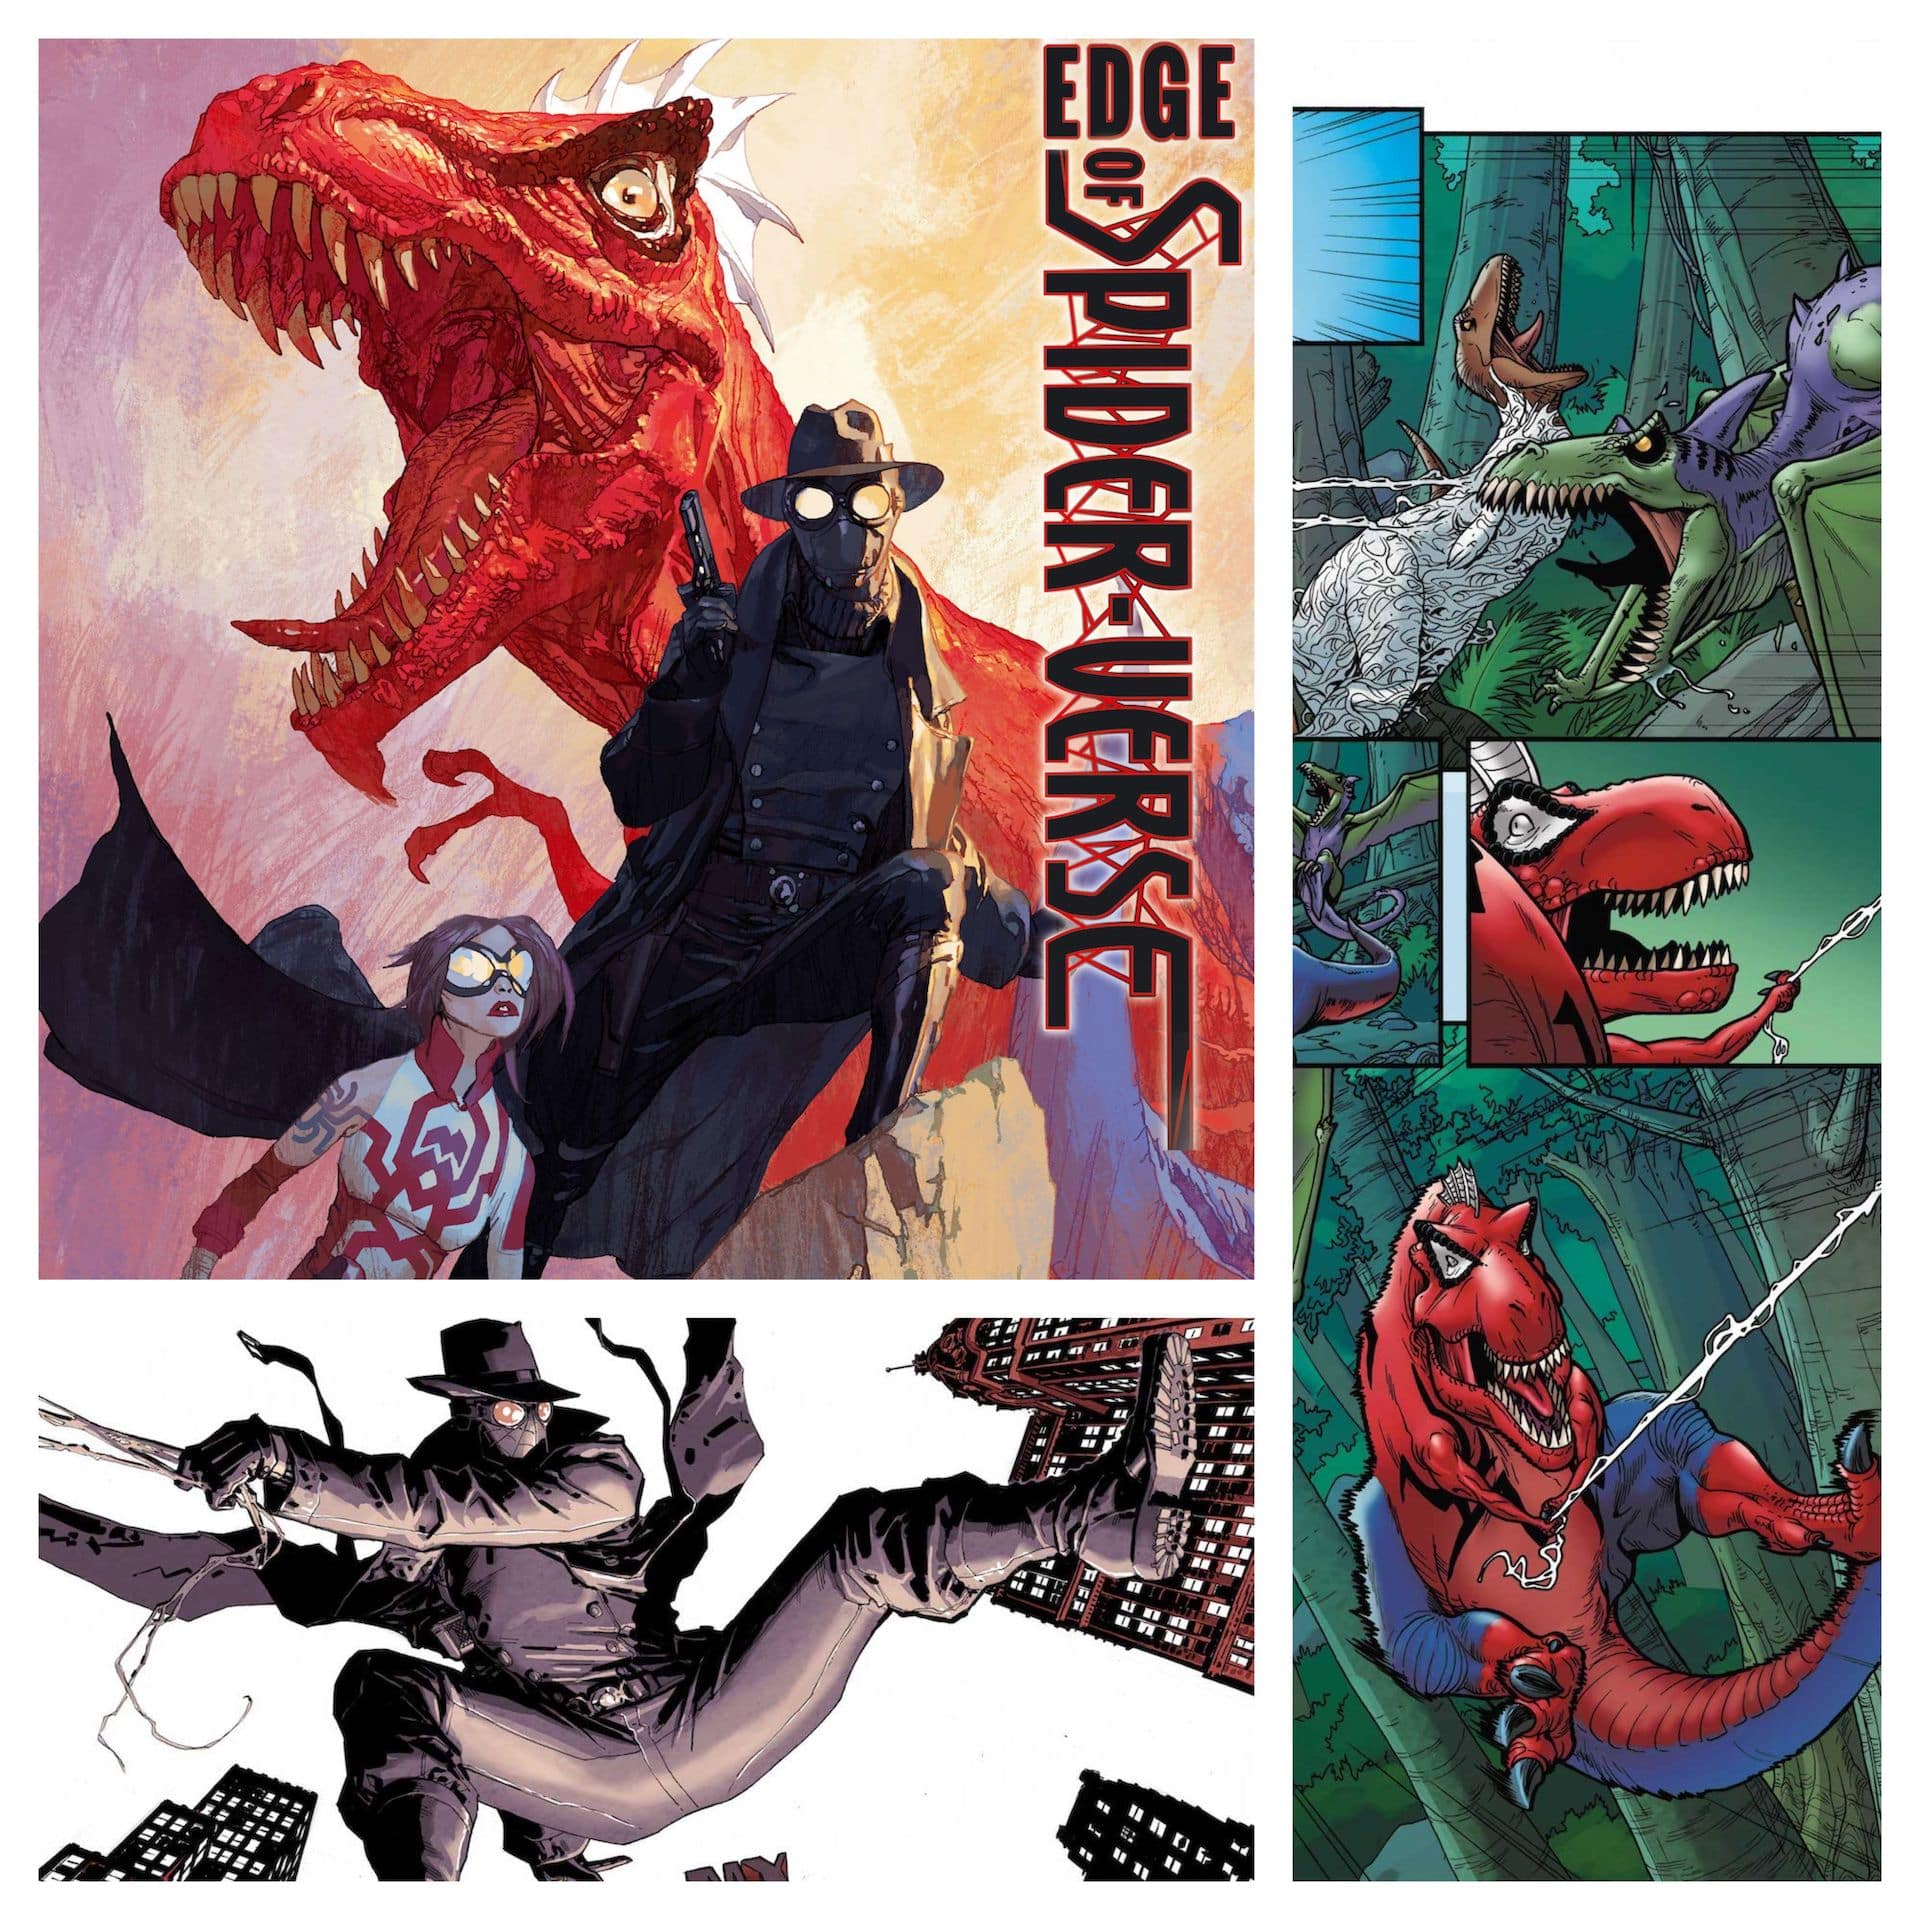 Check out every 'Edge of Spider-Verse' #1 cover and interior pages too